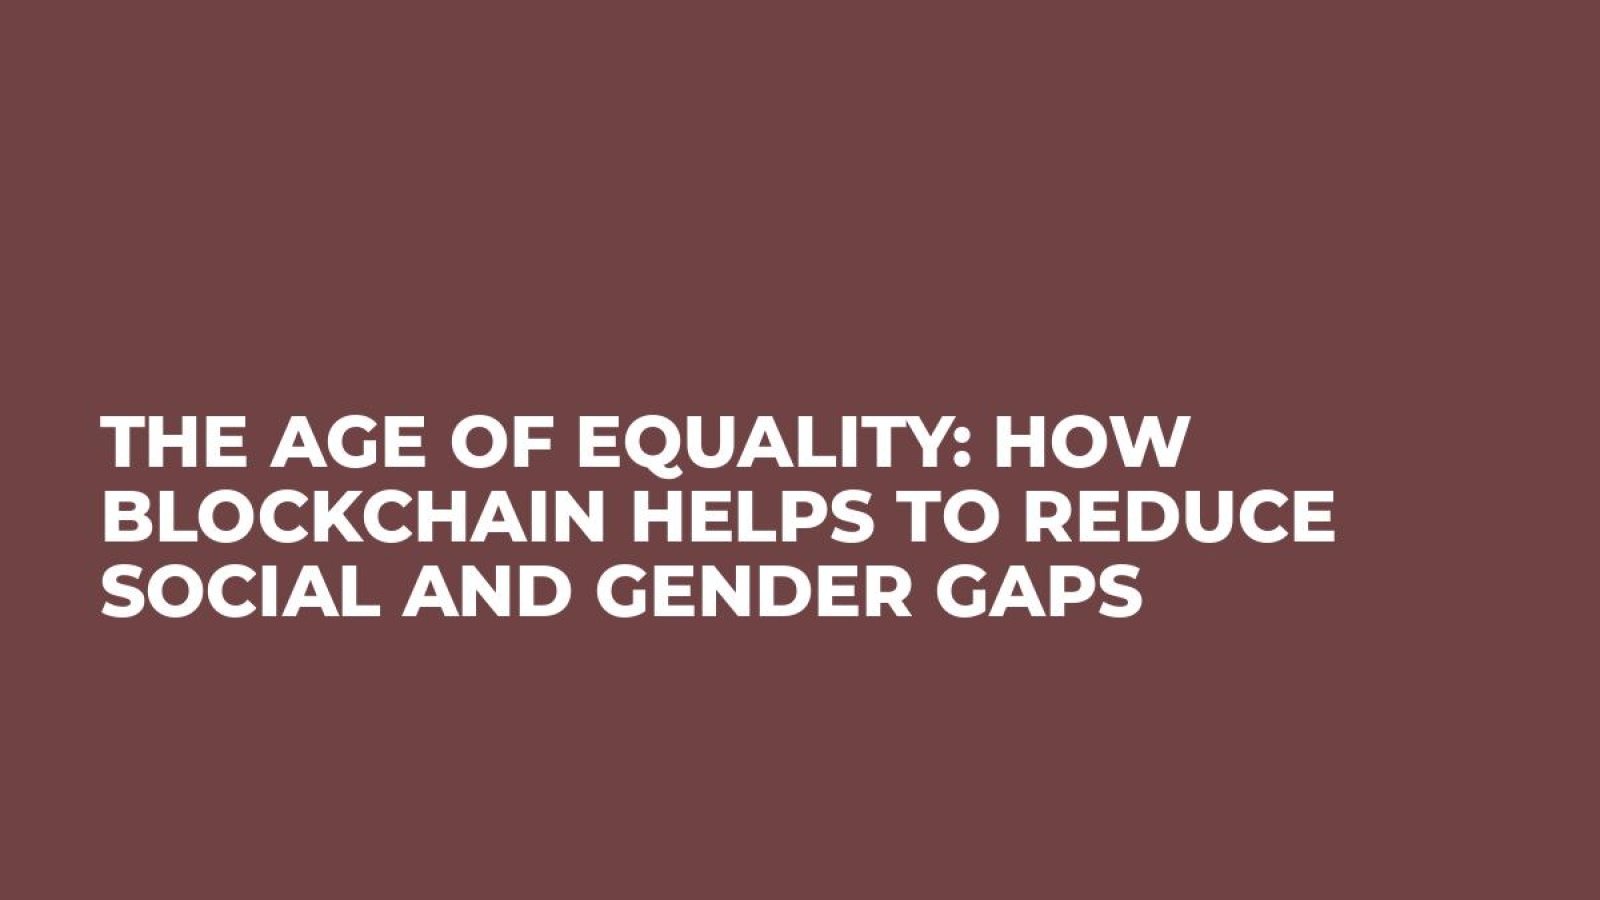 The Age of Equality: How Blockchain Helps to Reduce Social and Gender Gaps